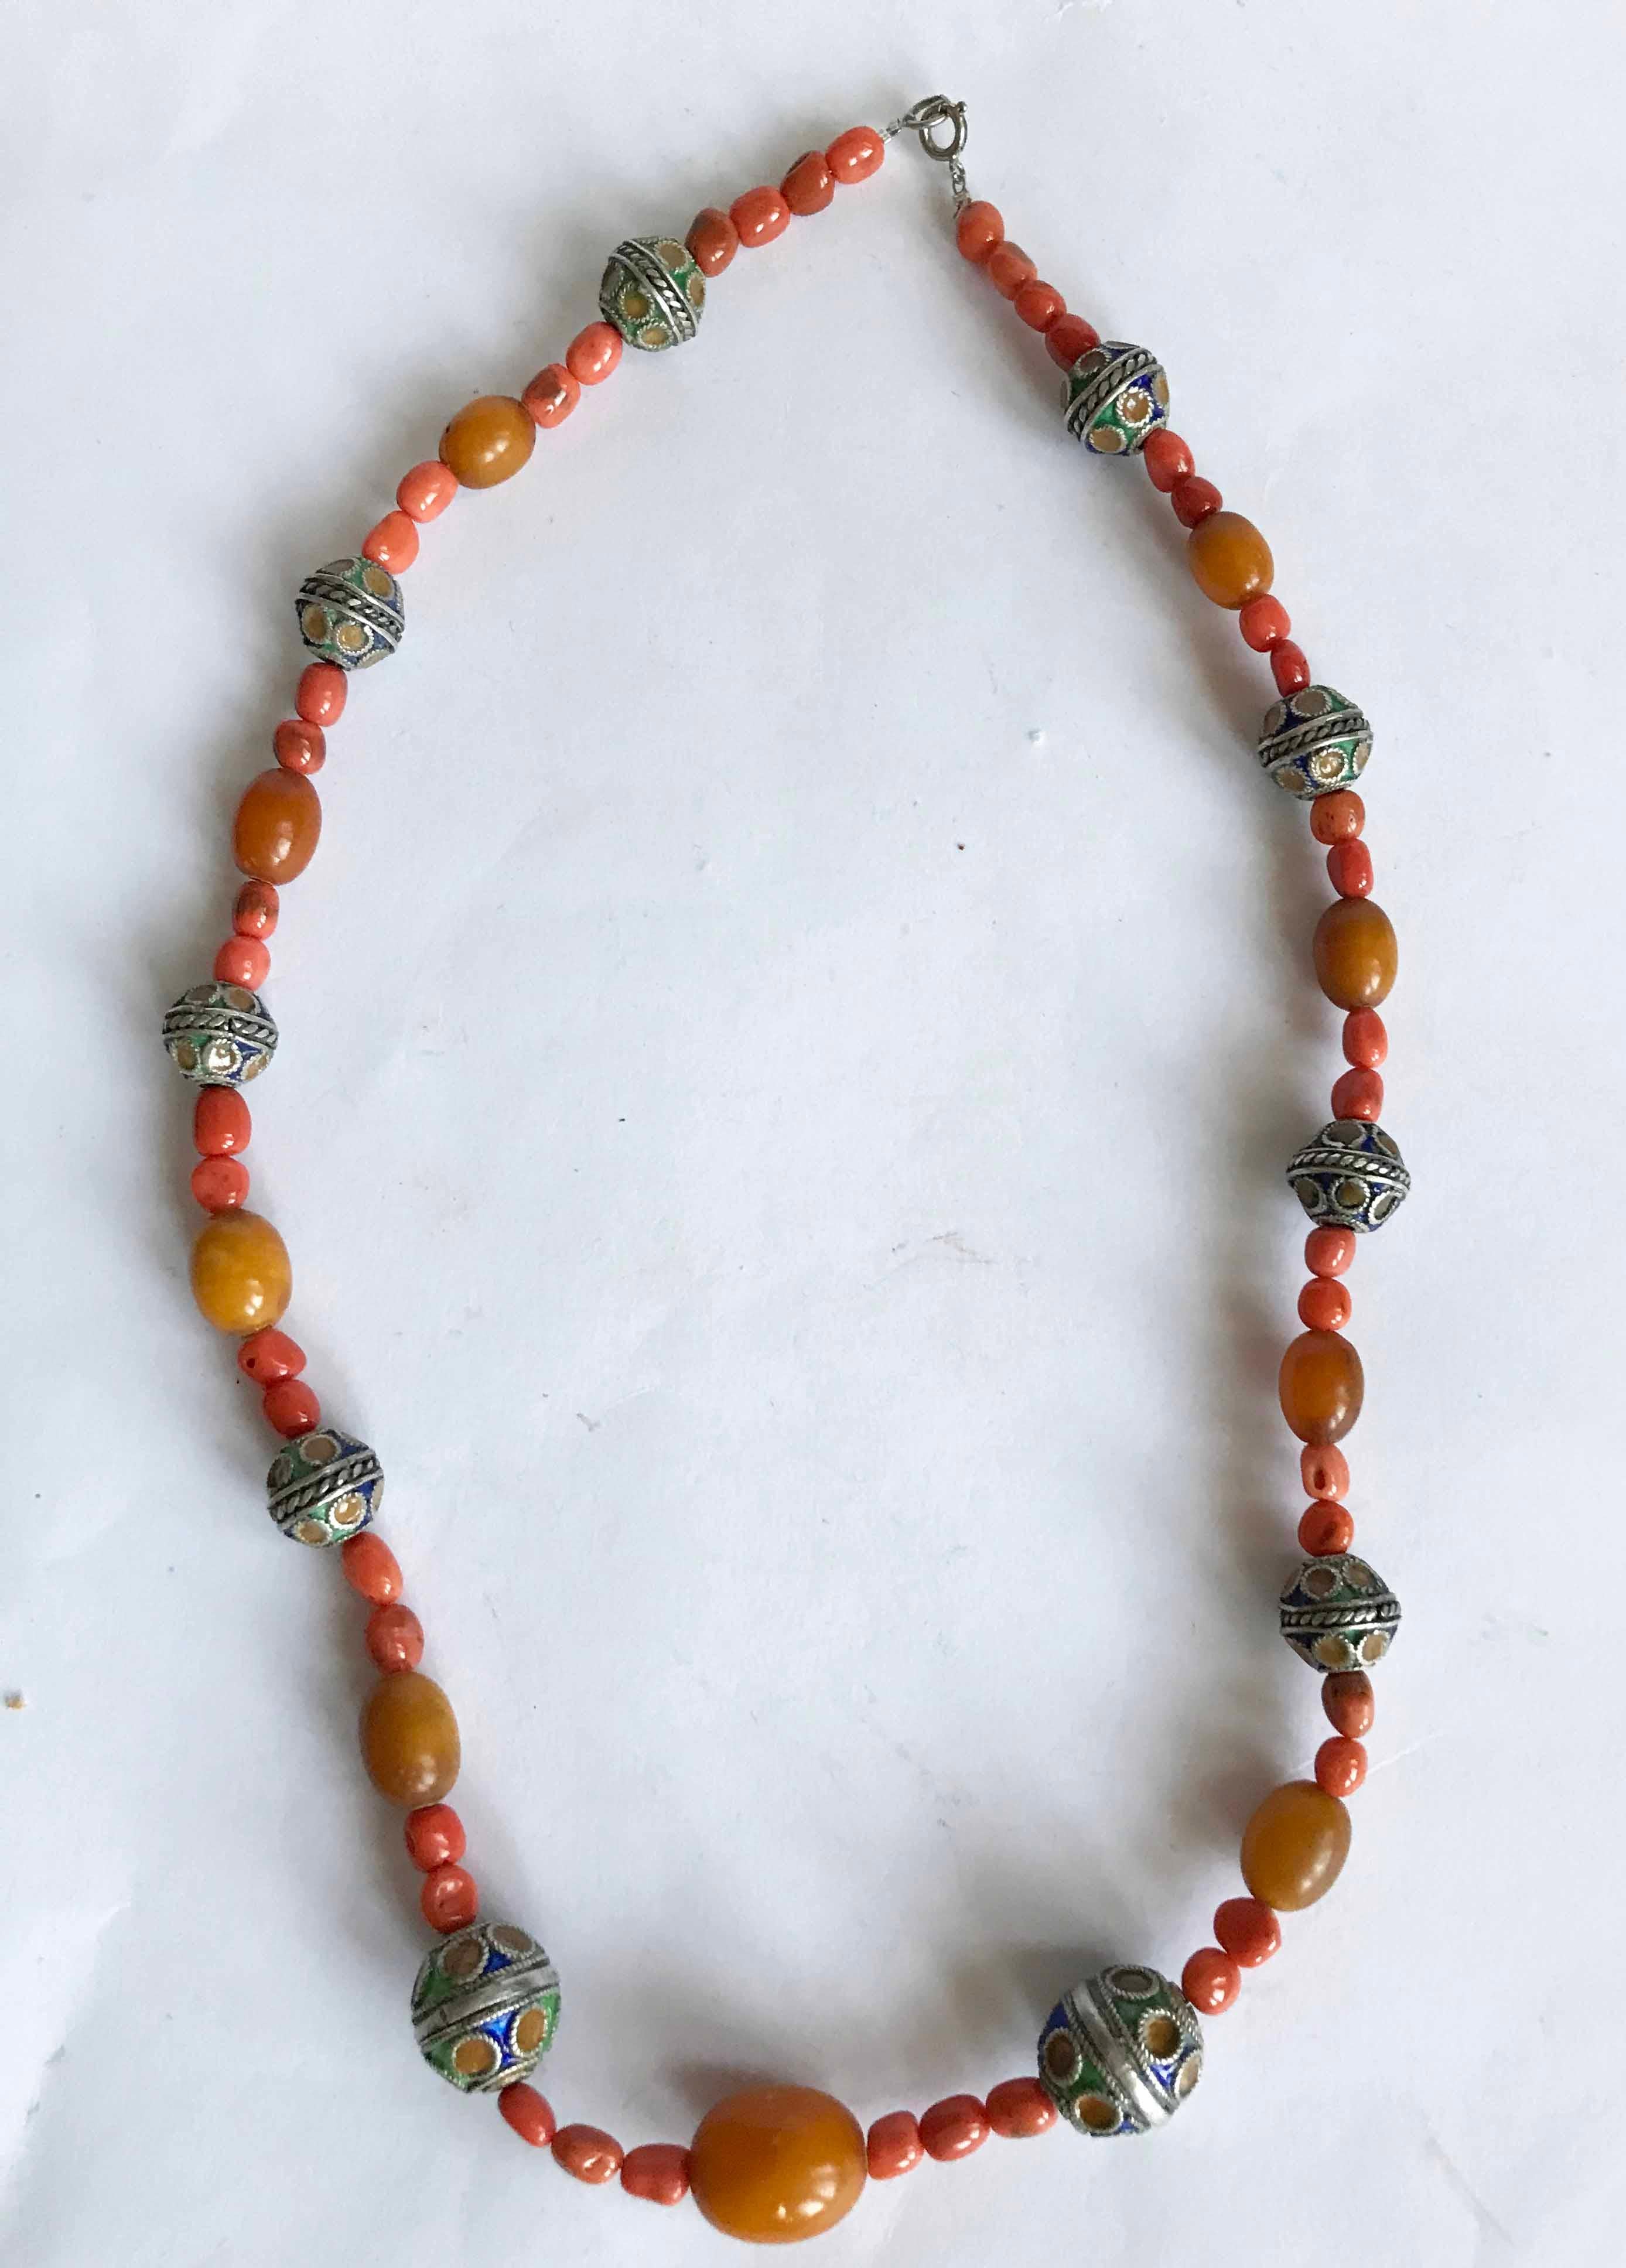 Vintage Kabyle Berber tribal silver enamel coral necklace.

A beautiful  vintage enamelled tribal silver and coral necklace from the kabyle Berber people of Algeria.

High grade silver with enamel and amber beads with antique coral.

Measure: